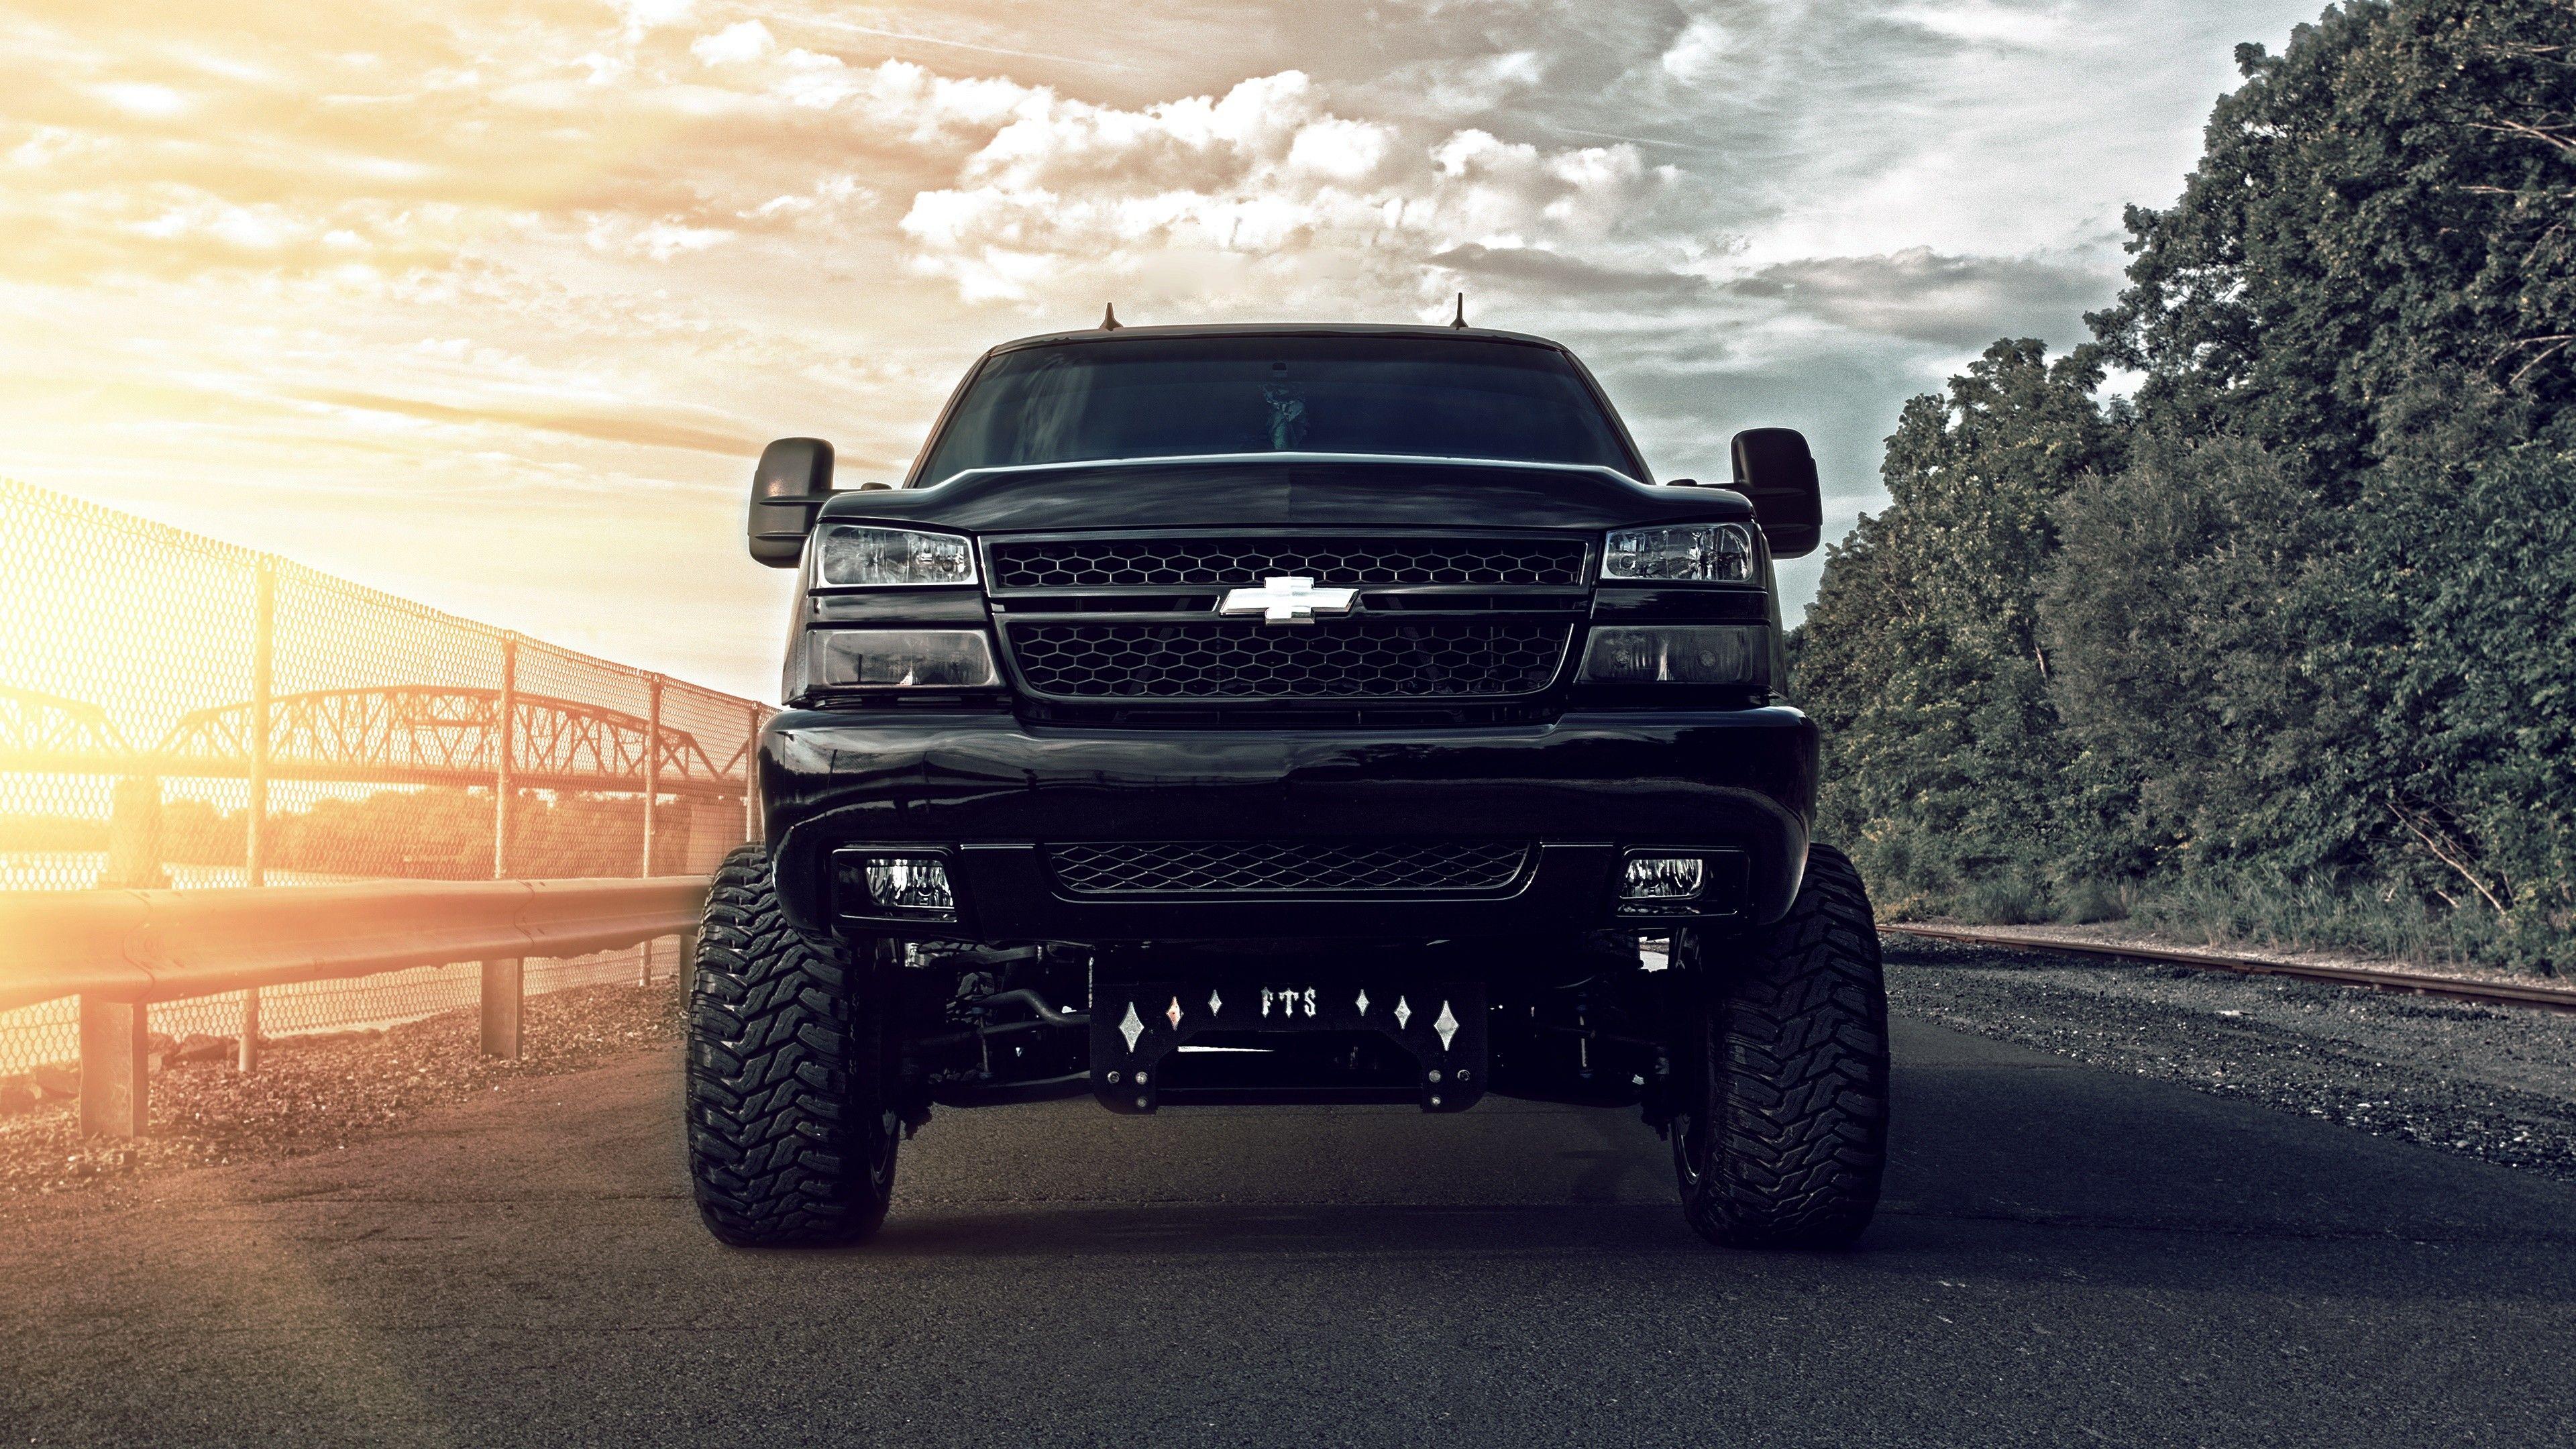 Chevy Truck Wallpapers Top Free Chevy Truck Backgrounds Wallpaperaccess